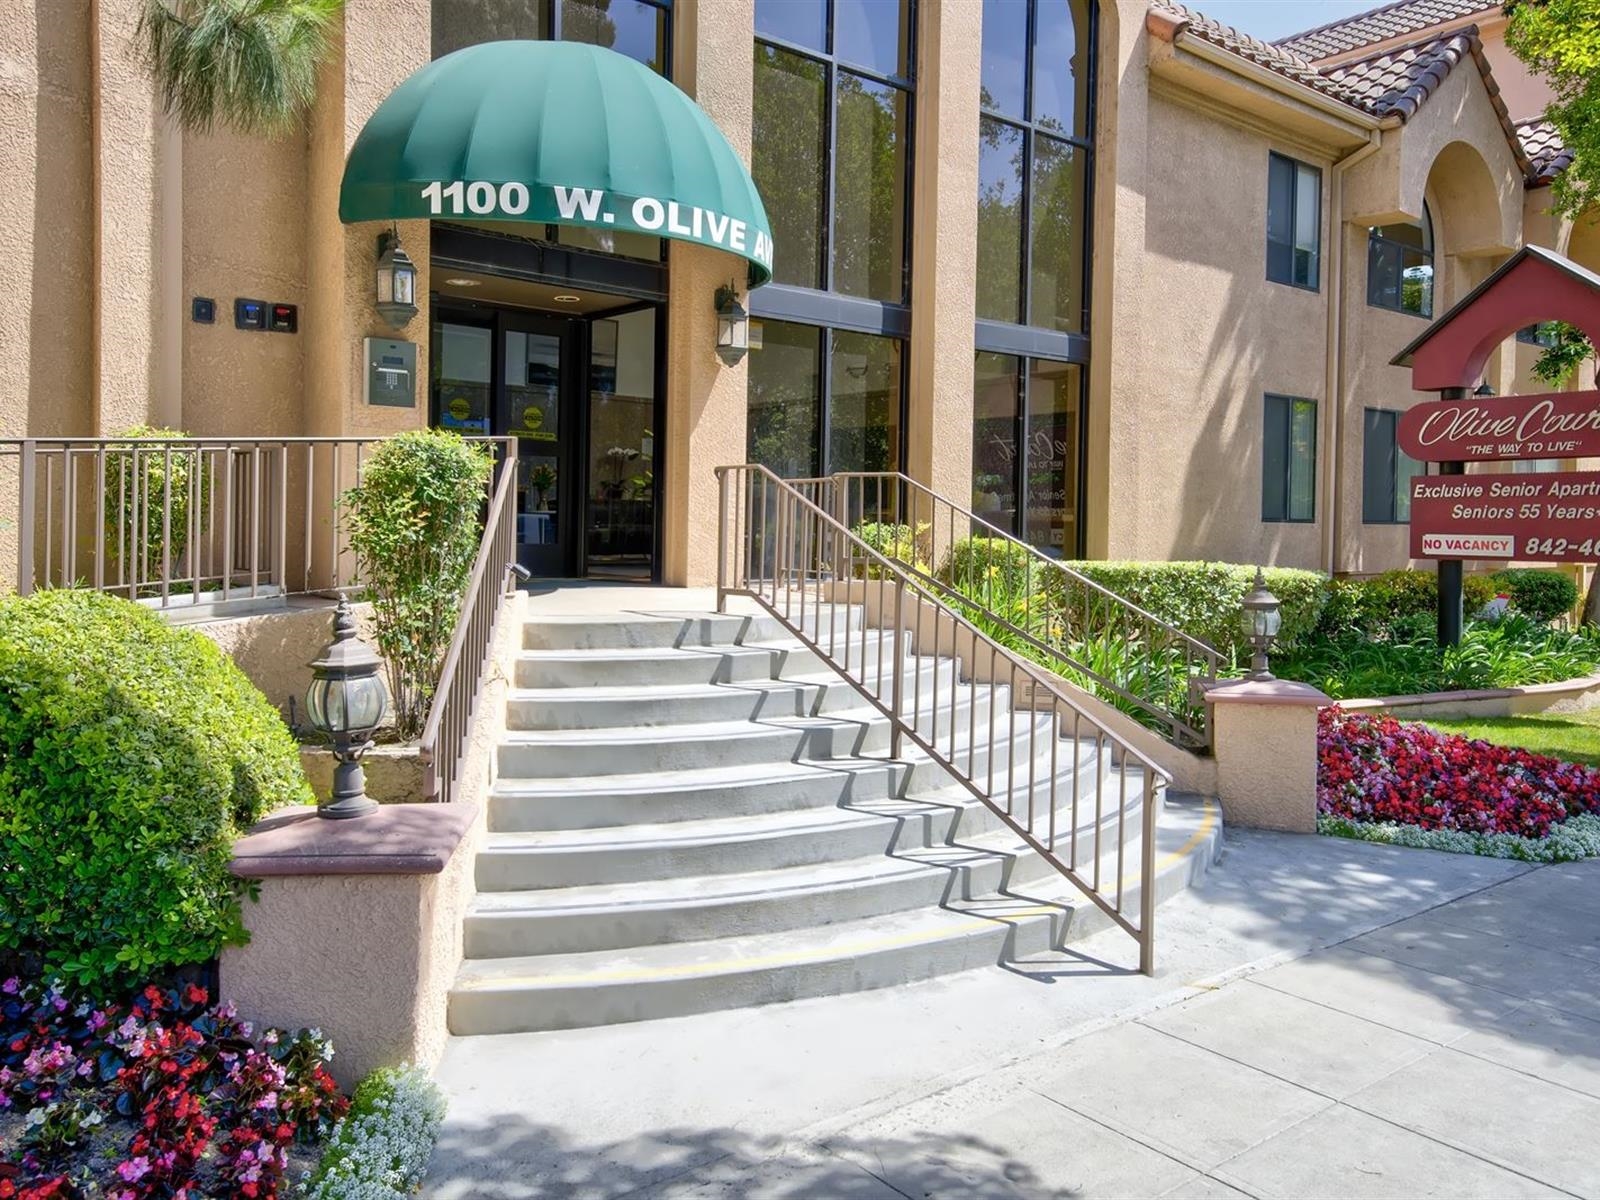 Olive Court Apartments for Rent in Burbank Senior Apartments